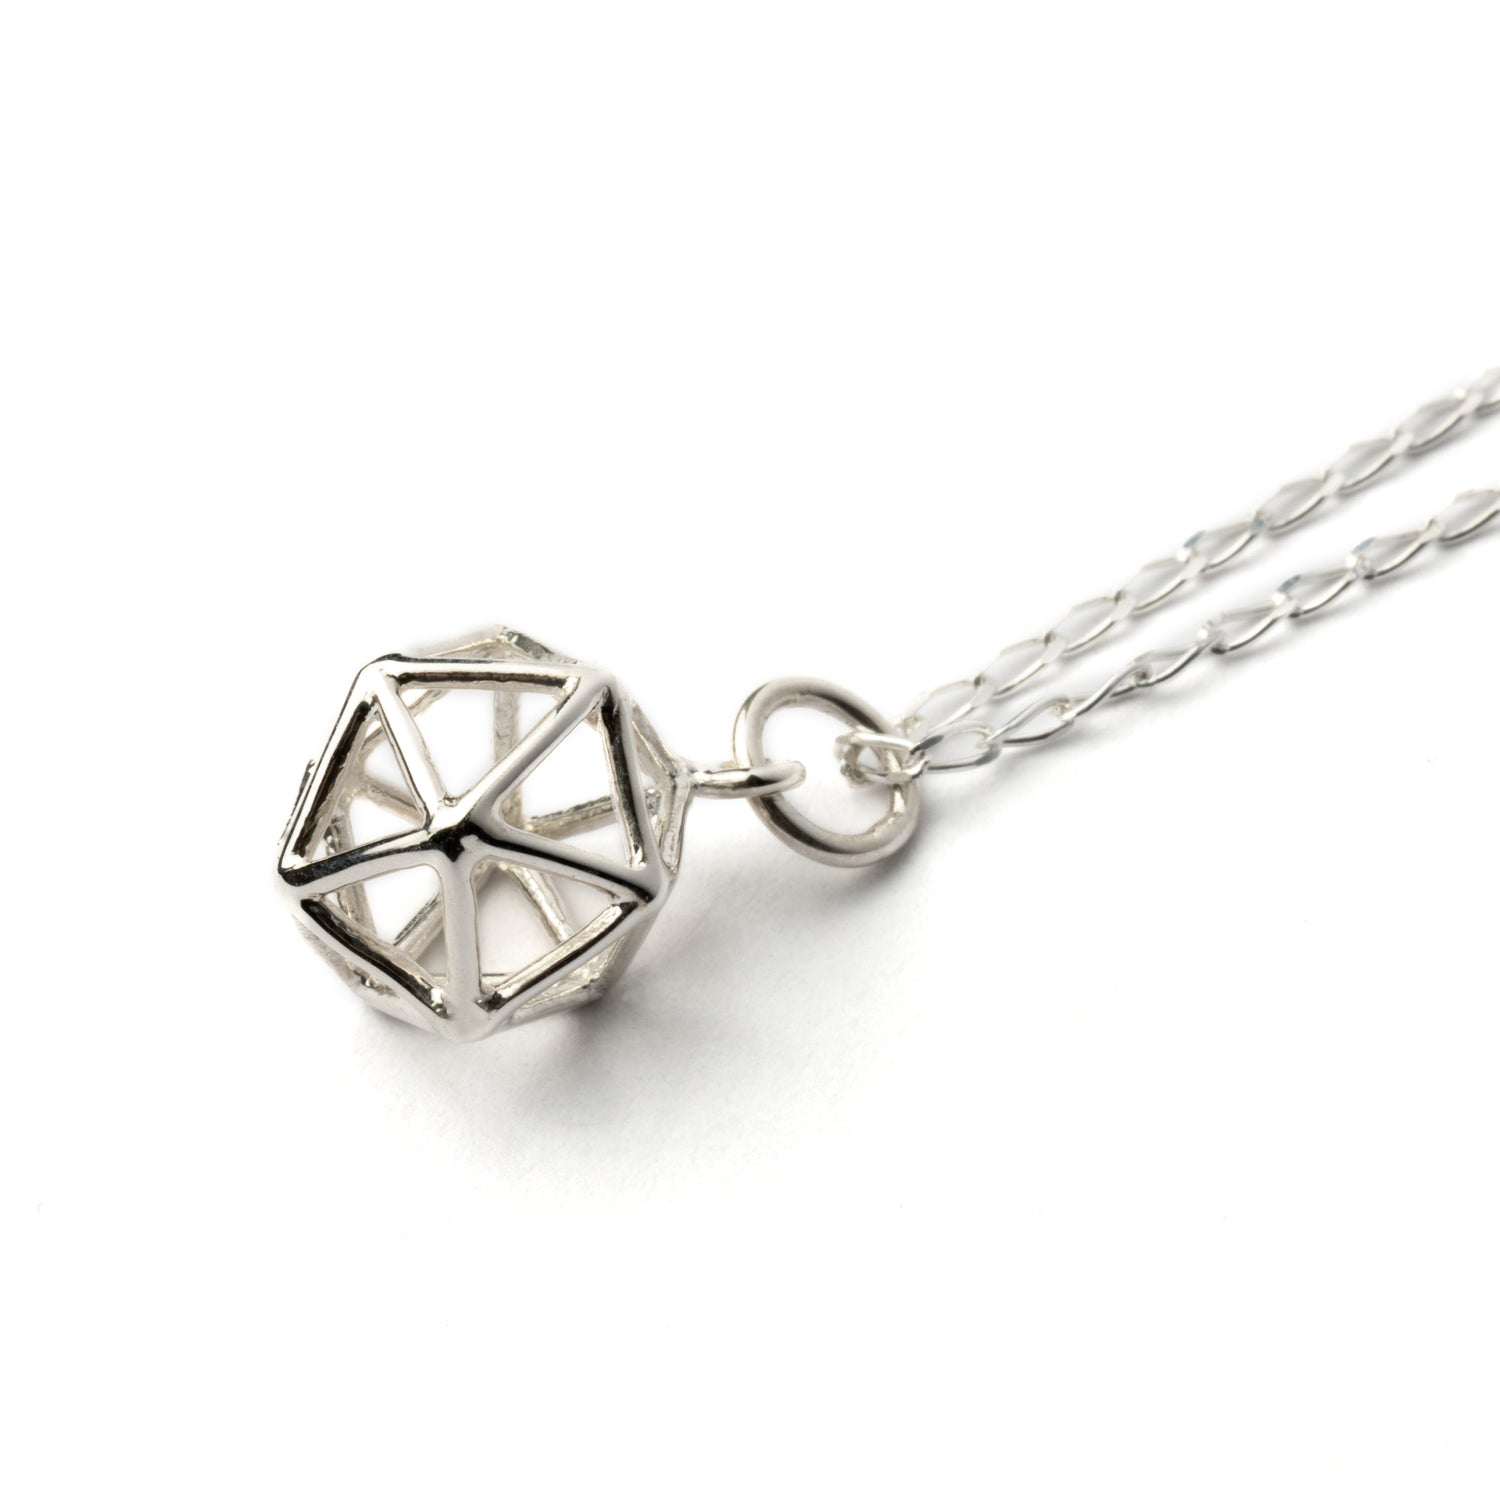 Silver Icosahedron Merkaba pendant necklace right side view